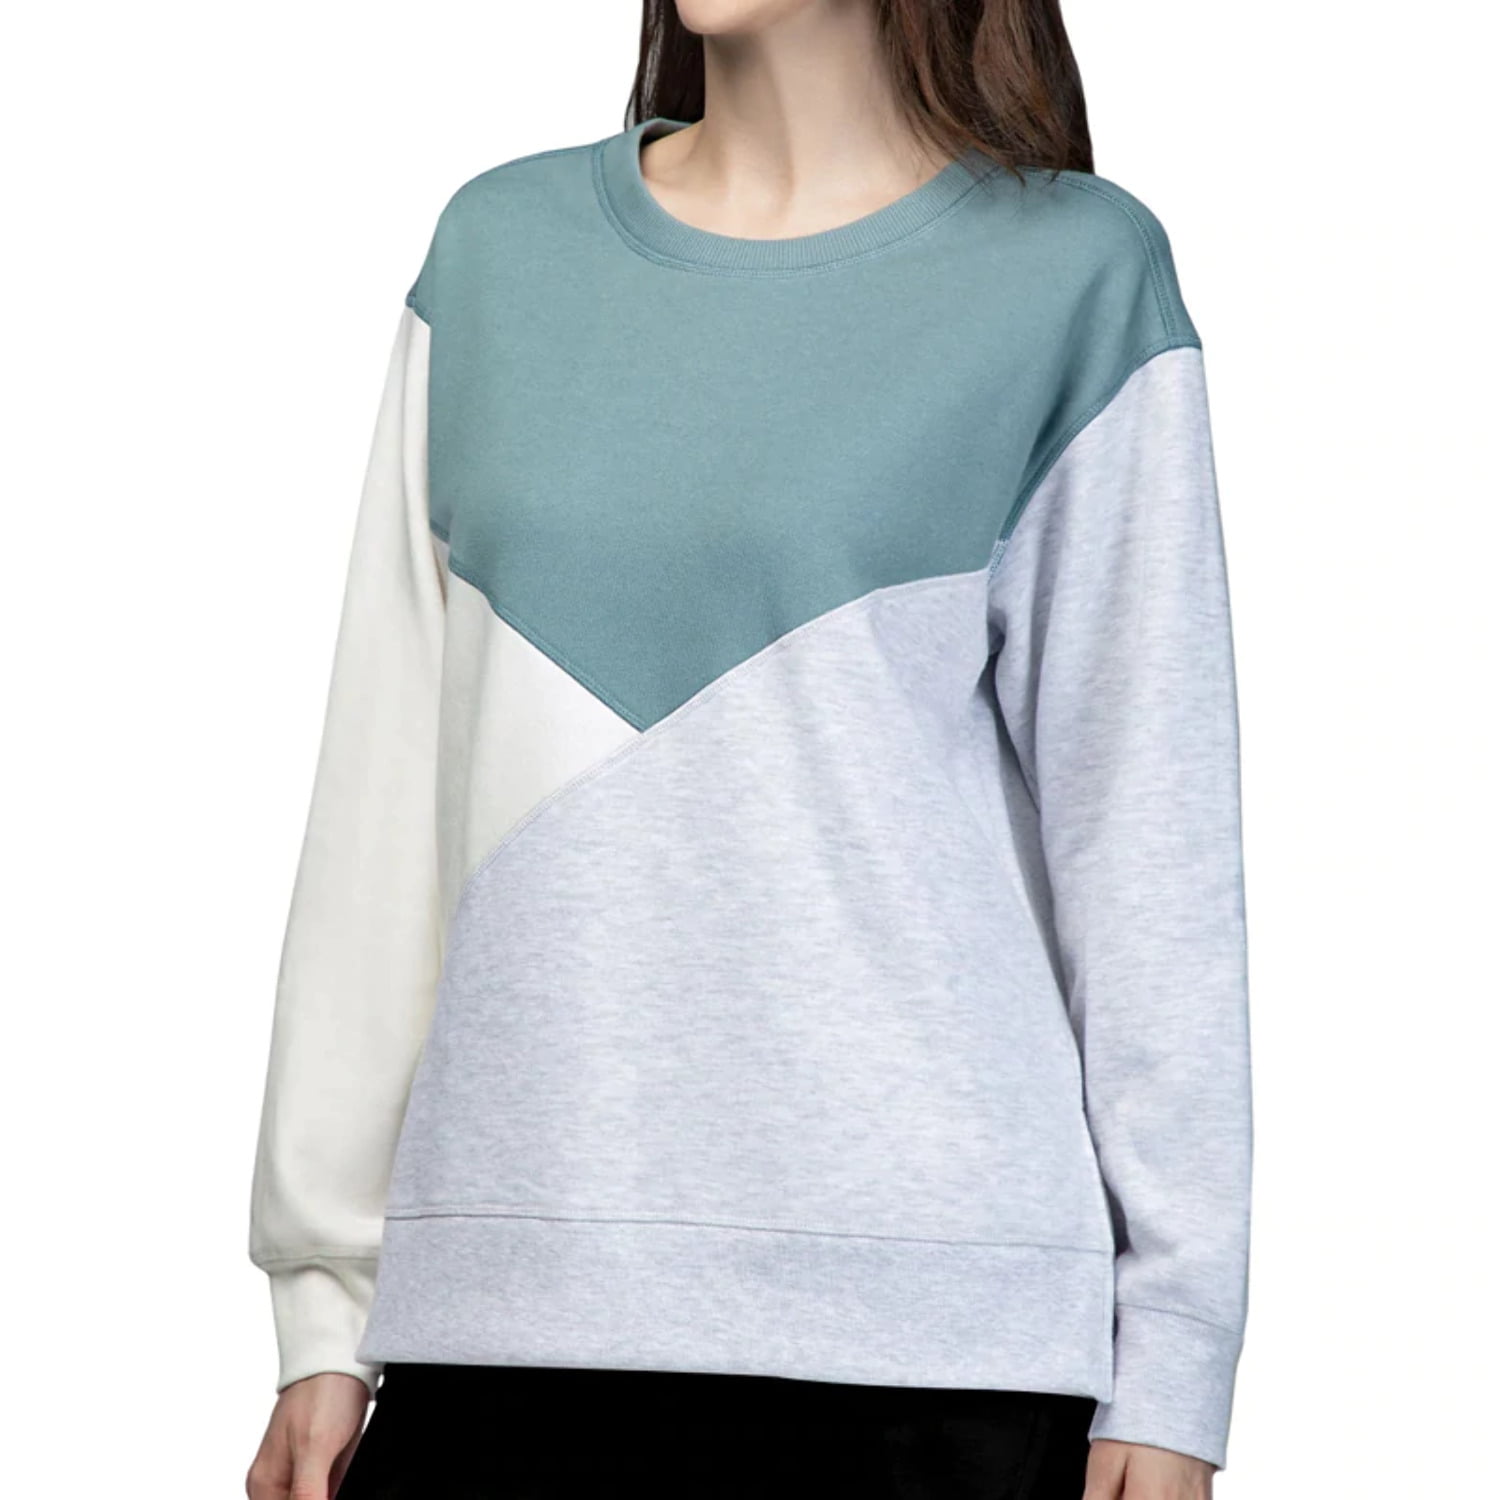 Plus Size Women's Colorblock Scoopneck Thermal Sweatshirt by Woman Within  in Azure Deep Teal (Size 2X) - Yahoo Shopping